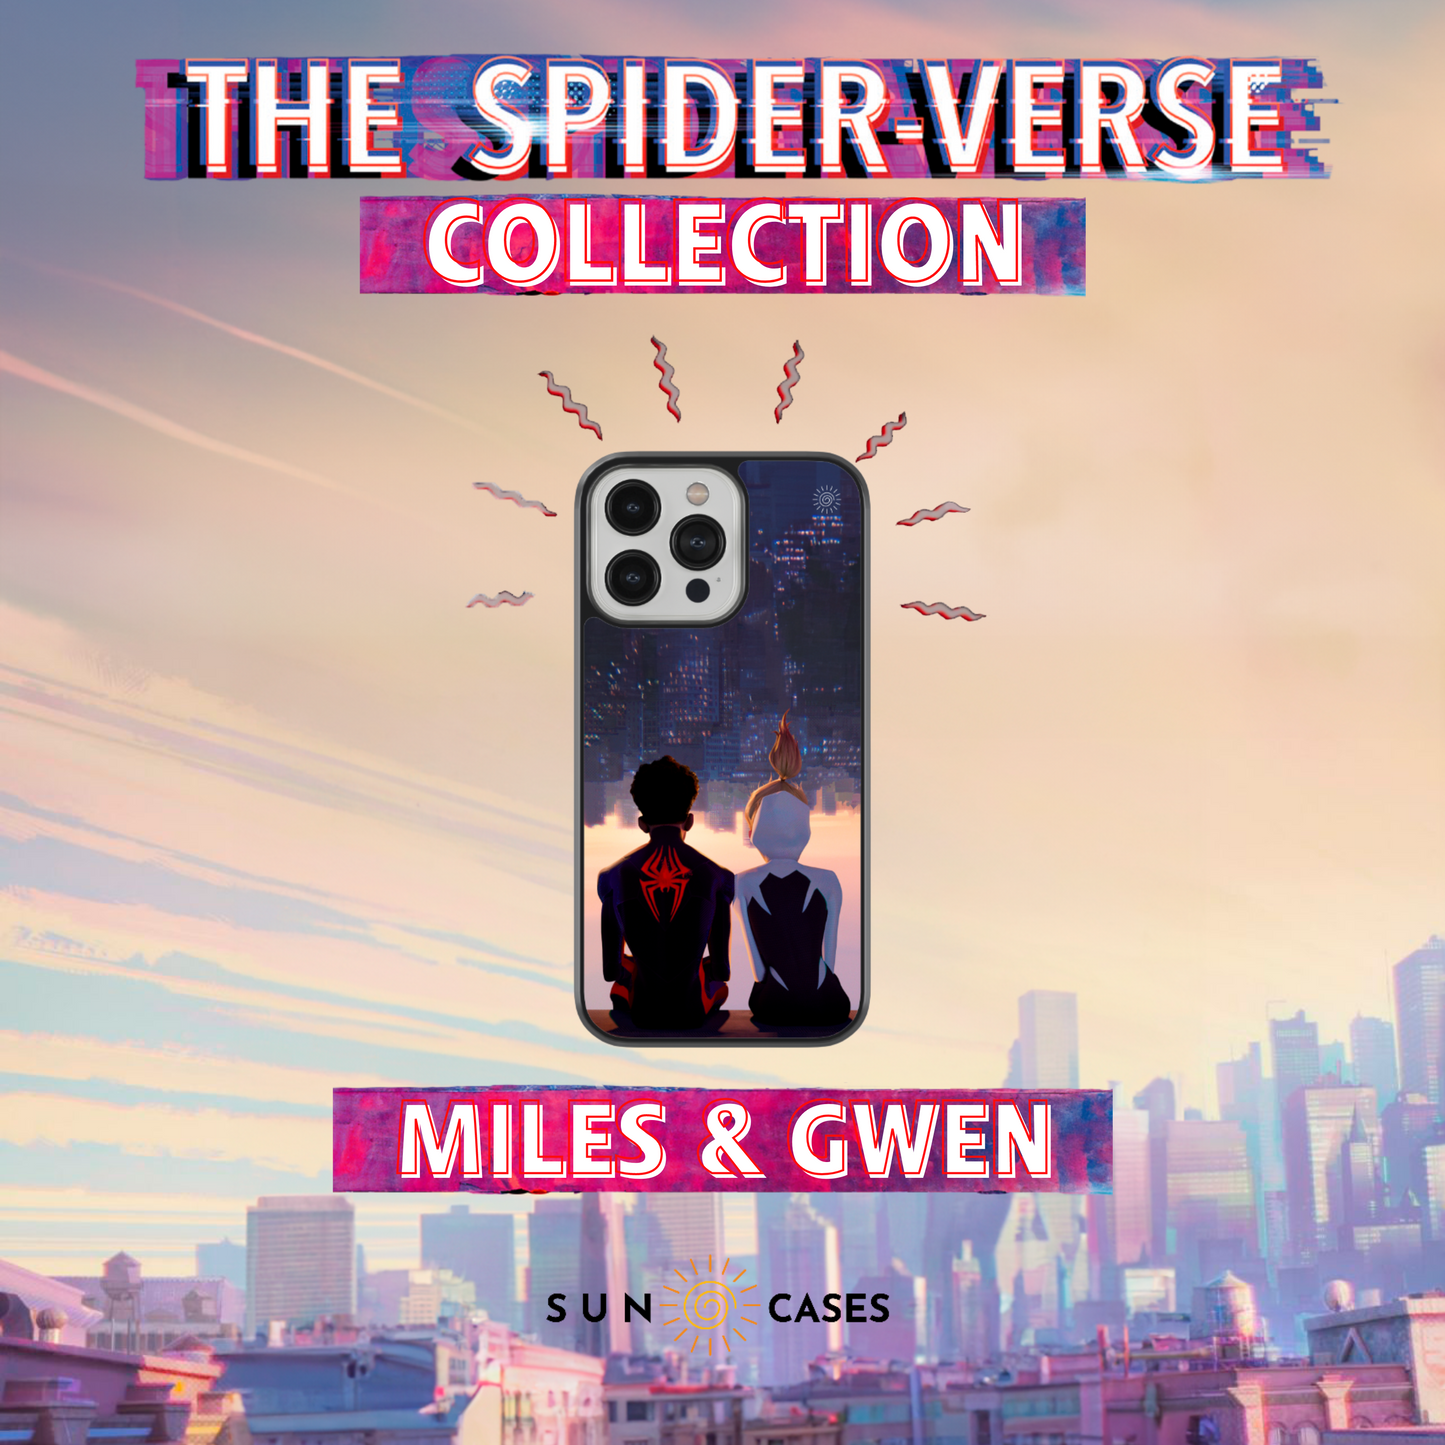 The Spider-Verse Collection - Miles & Gwen